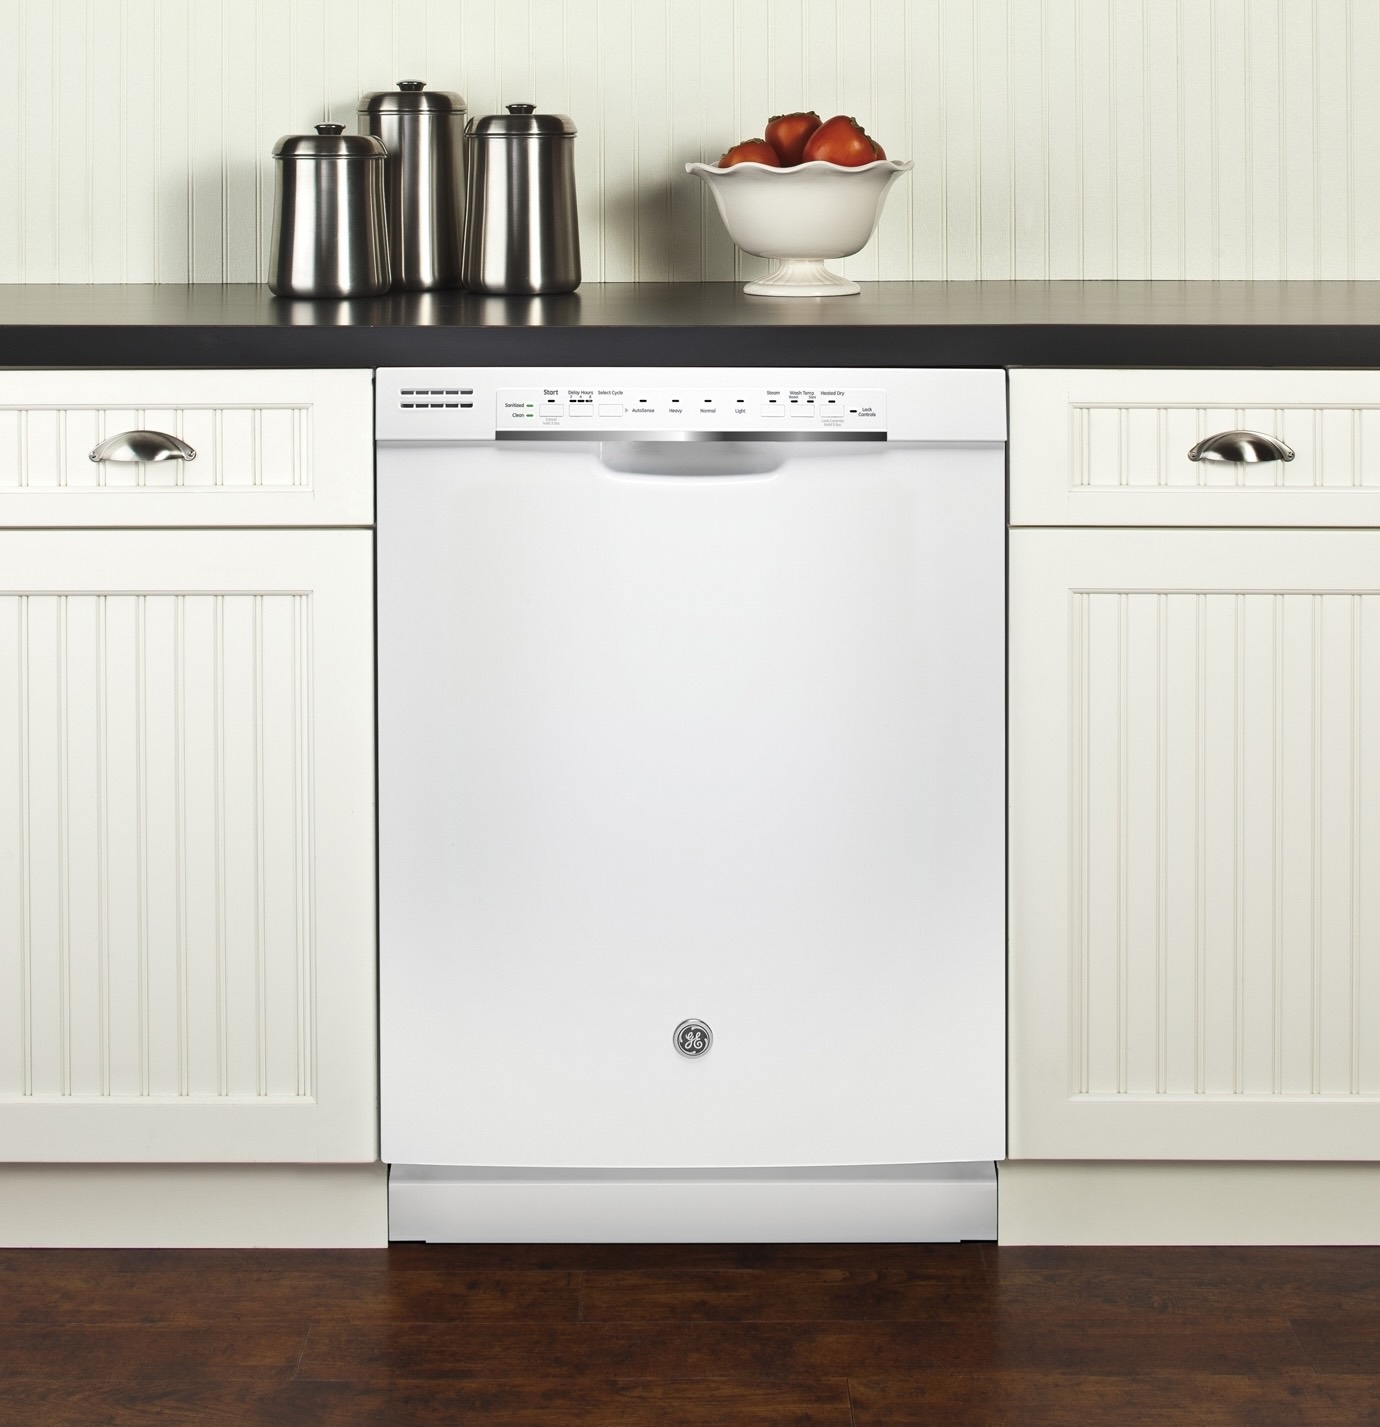 How To Fix The Error Code C5 For GE Dishwasher